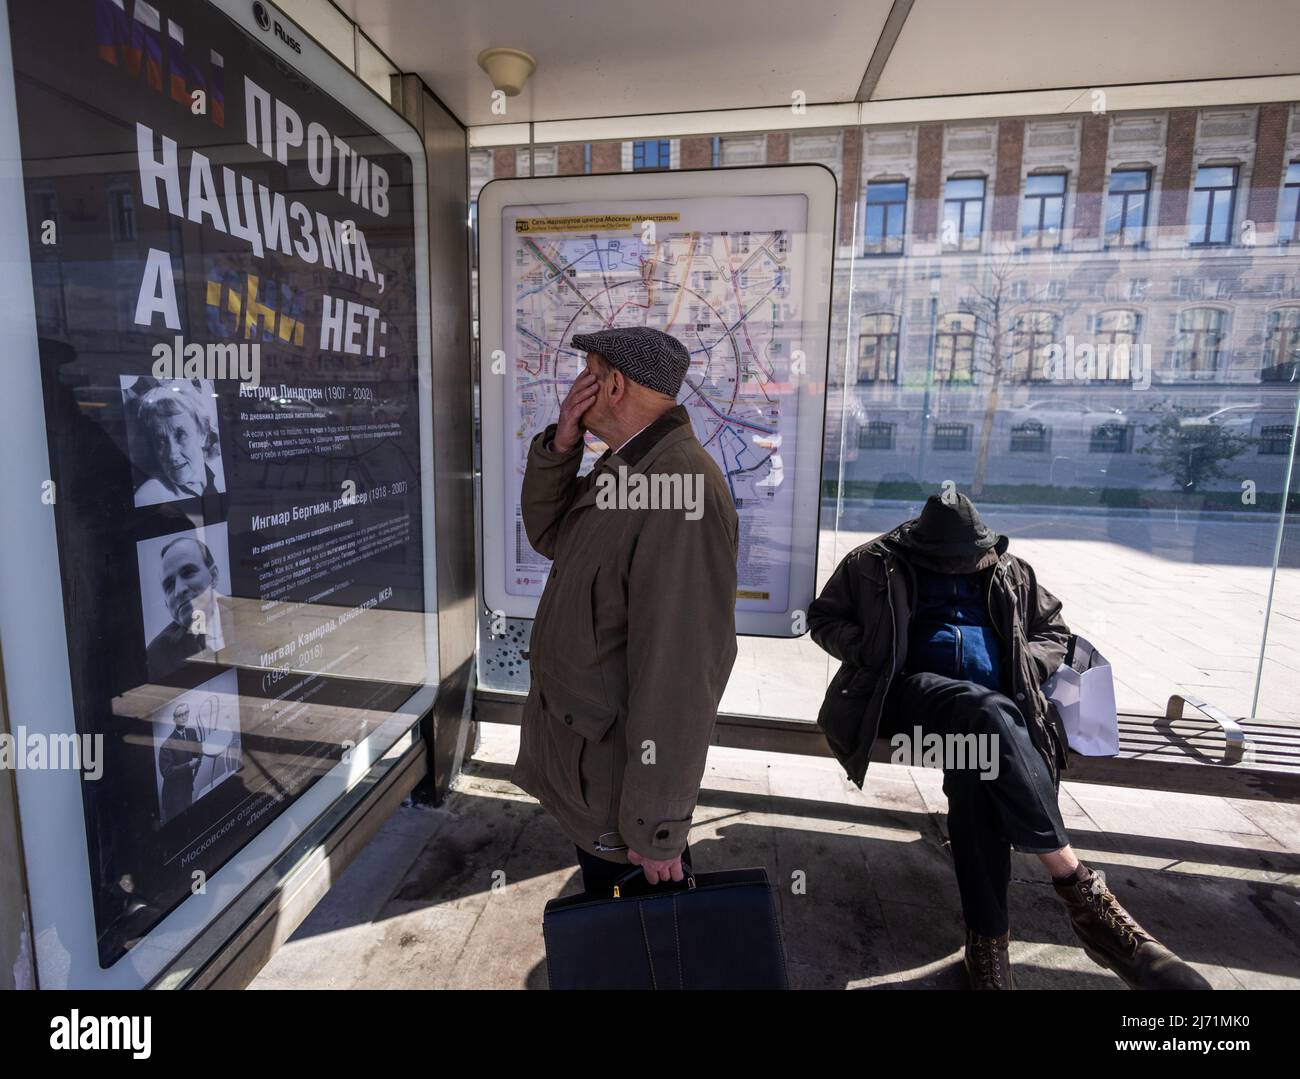 A man looks at a poster with photographs of Swedish writer Astrid Lindgren, film director Ingmar Bergman, IKEA founder Ingvar Kamprad, and the message 'We are against Nazism, they are not' at a bus stop in Moscow, Russia May 5, 2022. REUTERS/REUTERS PHOTOGRAPHER Stock Photo